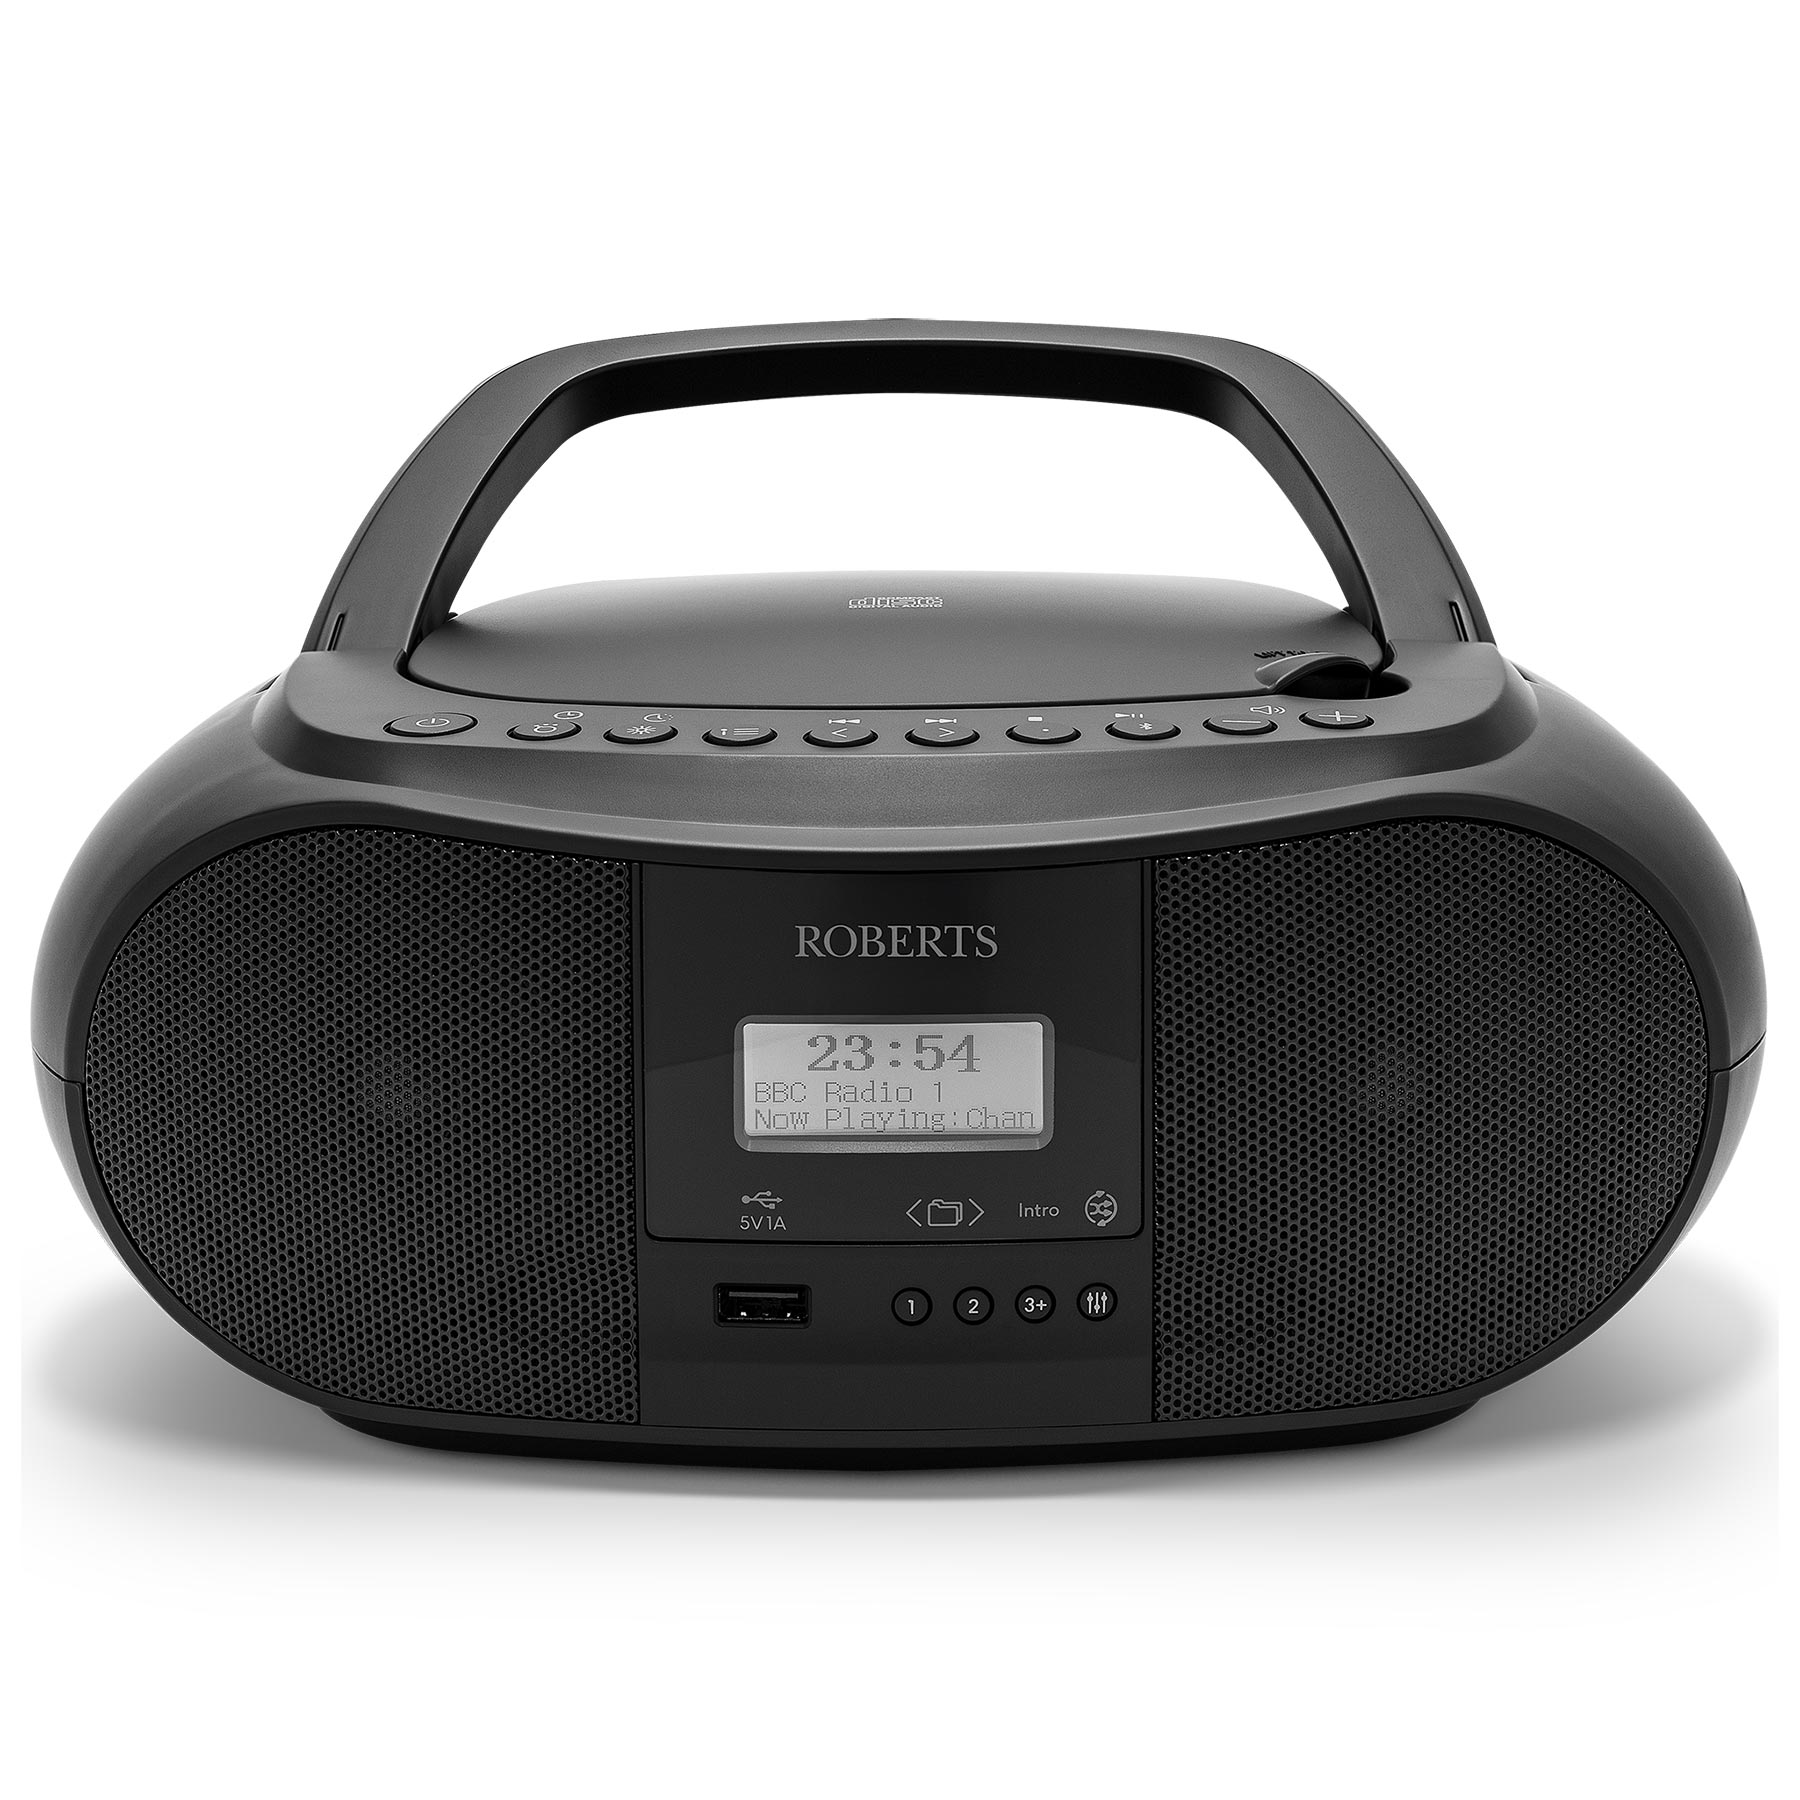 Image of Roberts ZOOMBOX4BK DAB FM Portable Boombox with CD Player USB in Black